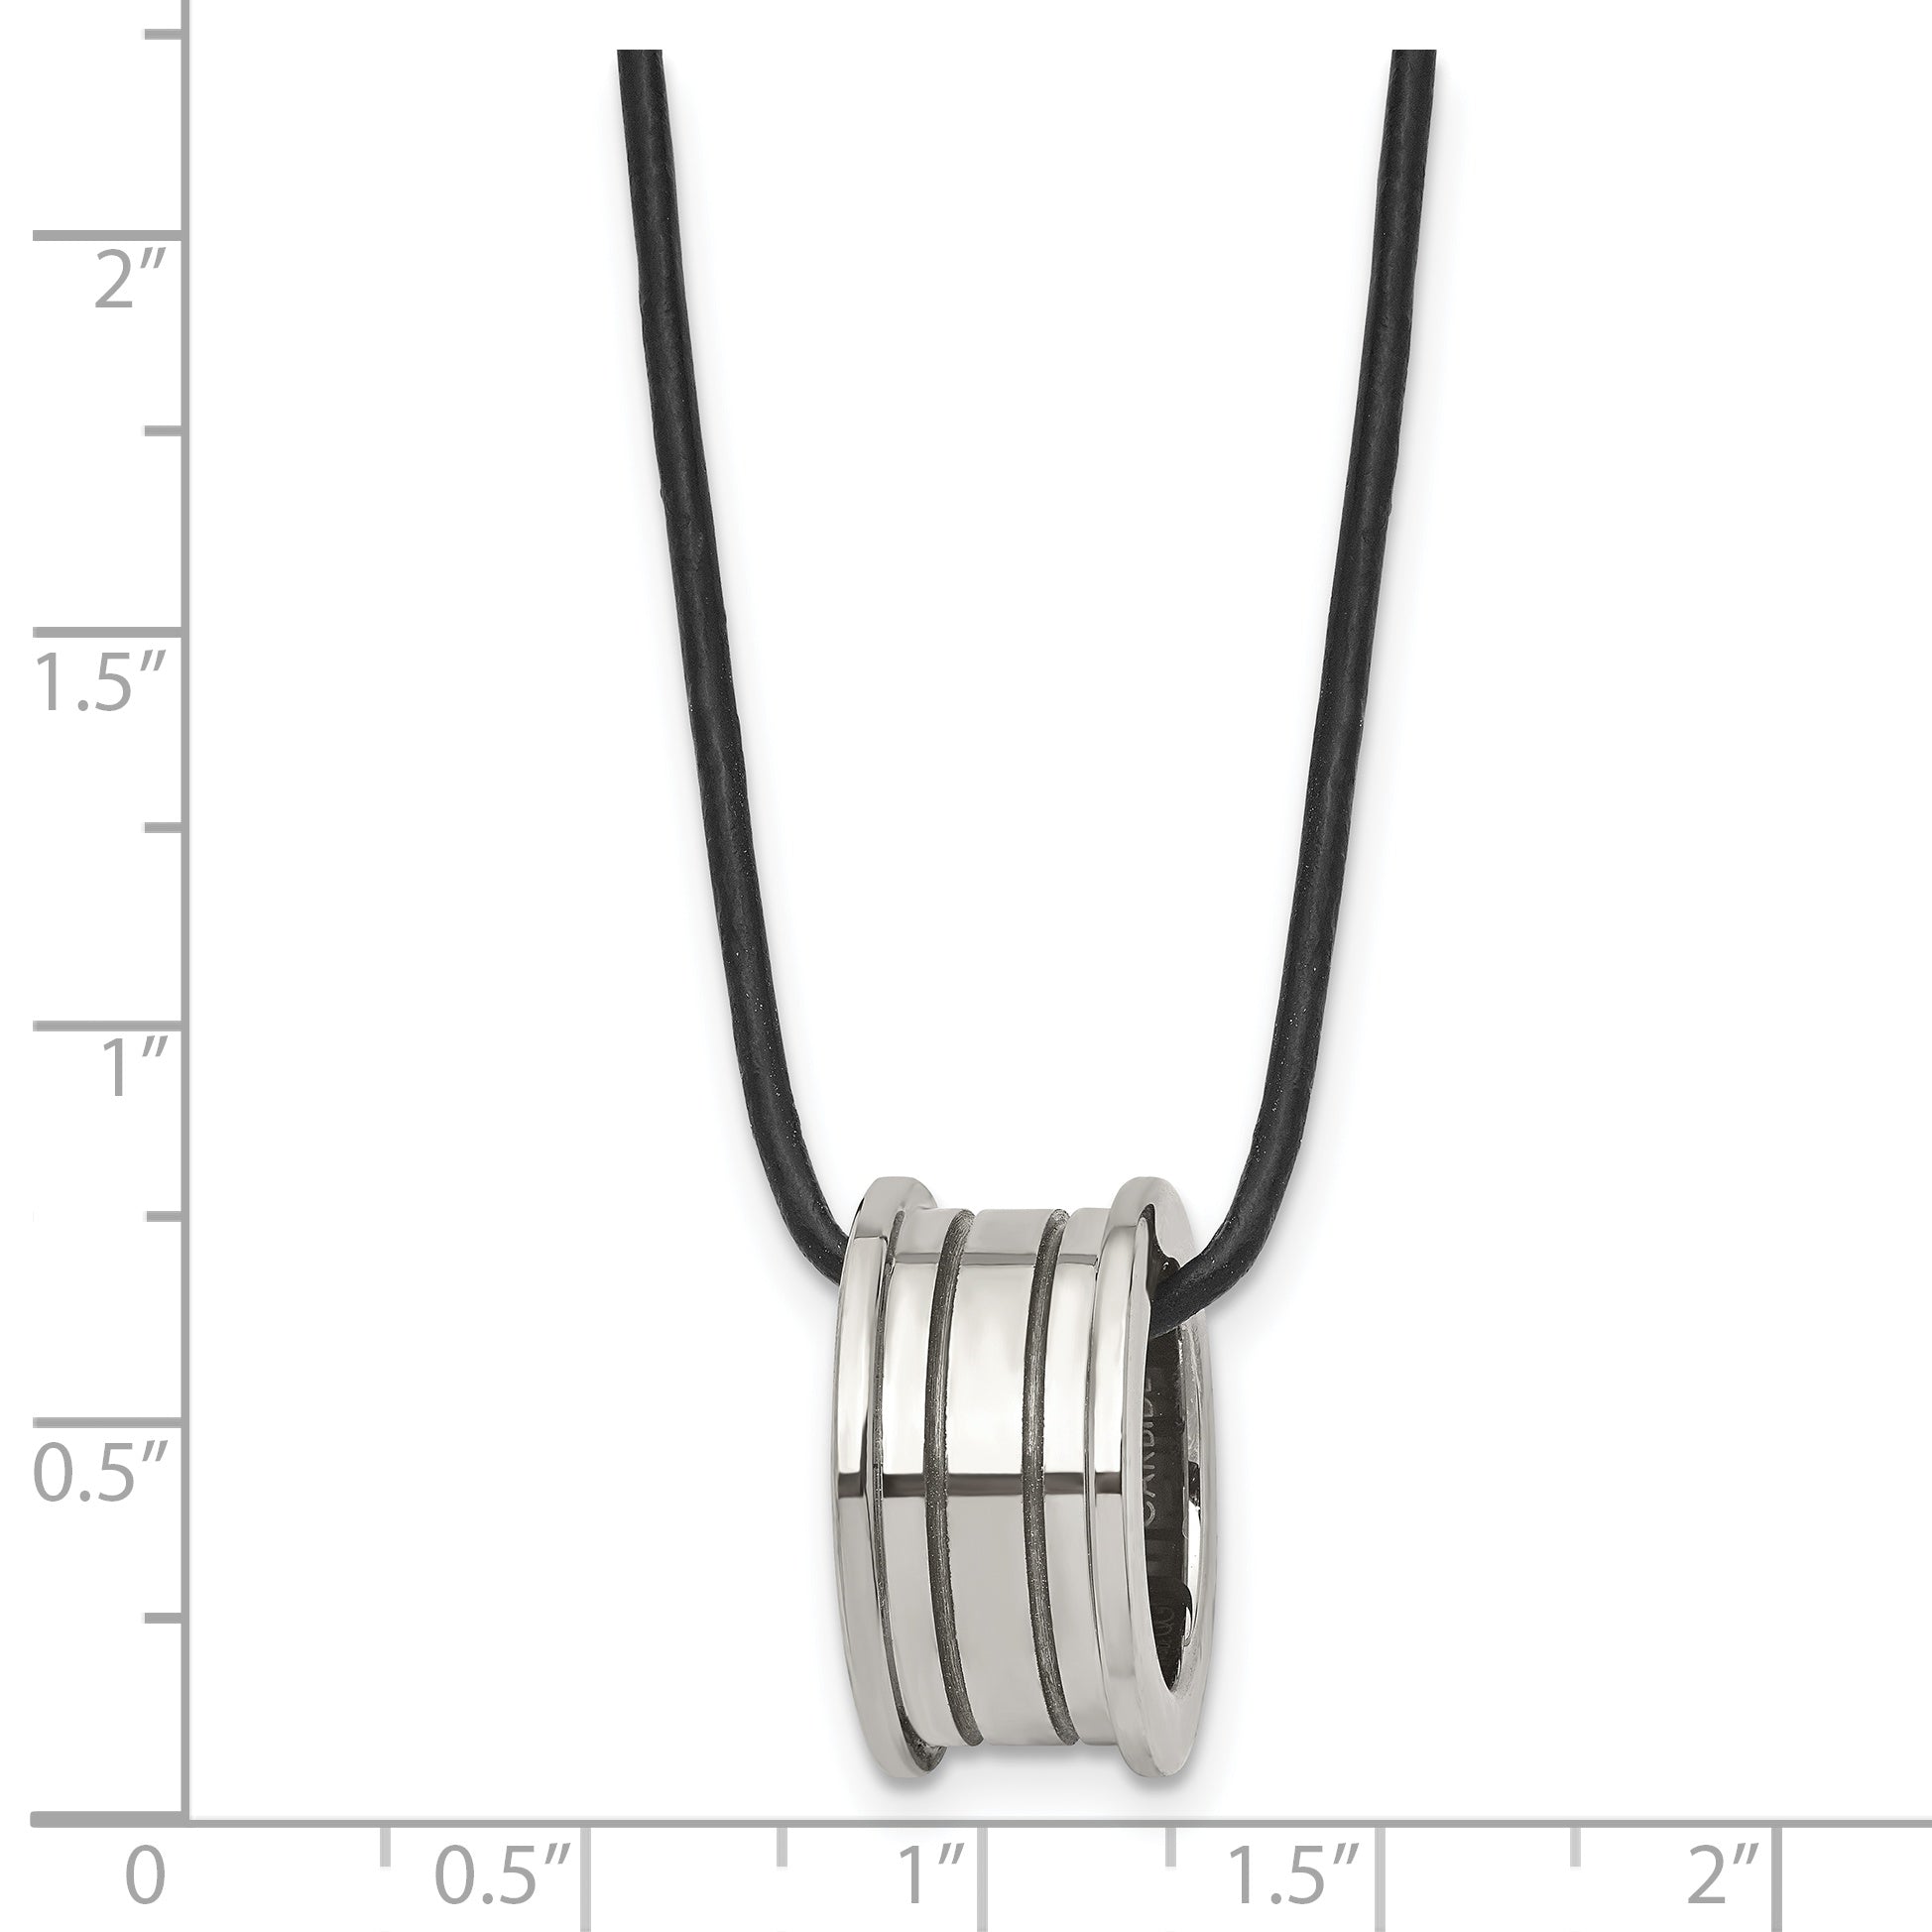 Tungsten Polished Leather Cord 18in Necklace